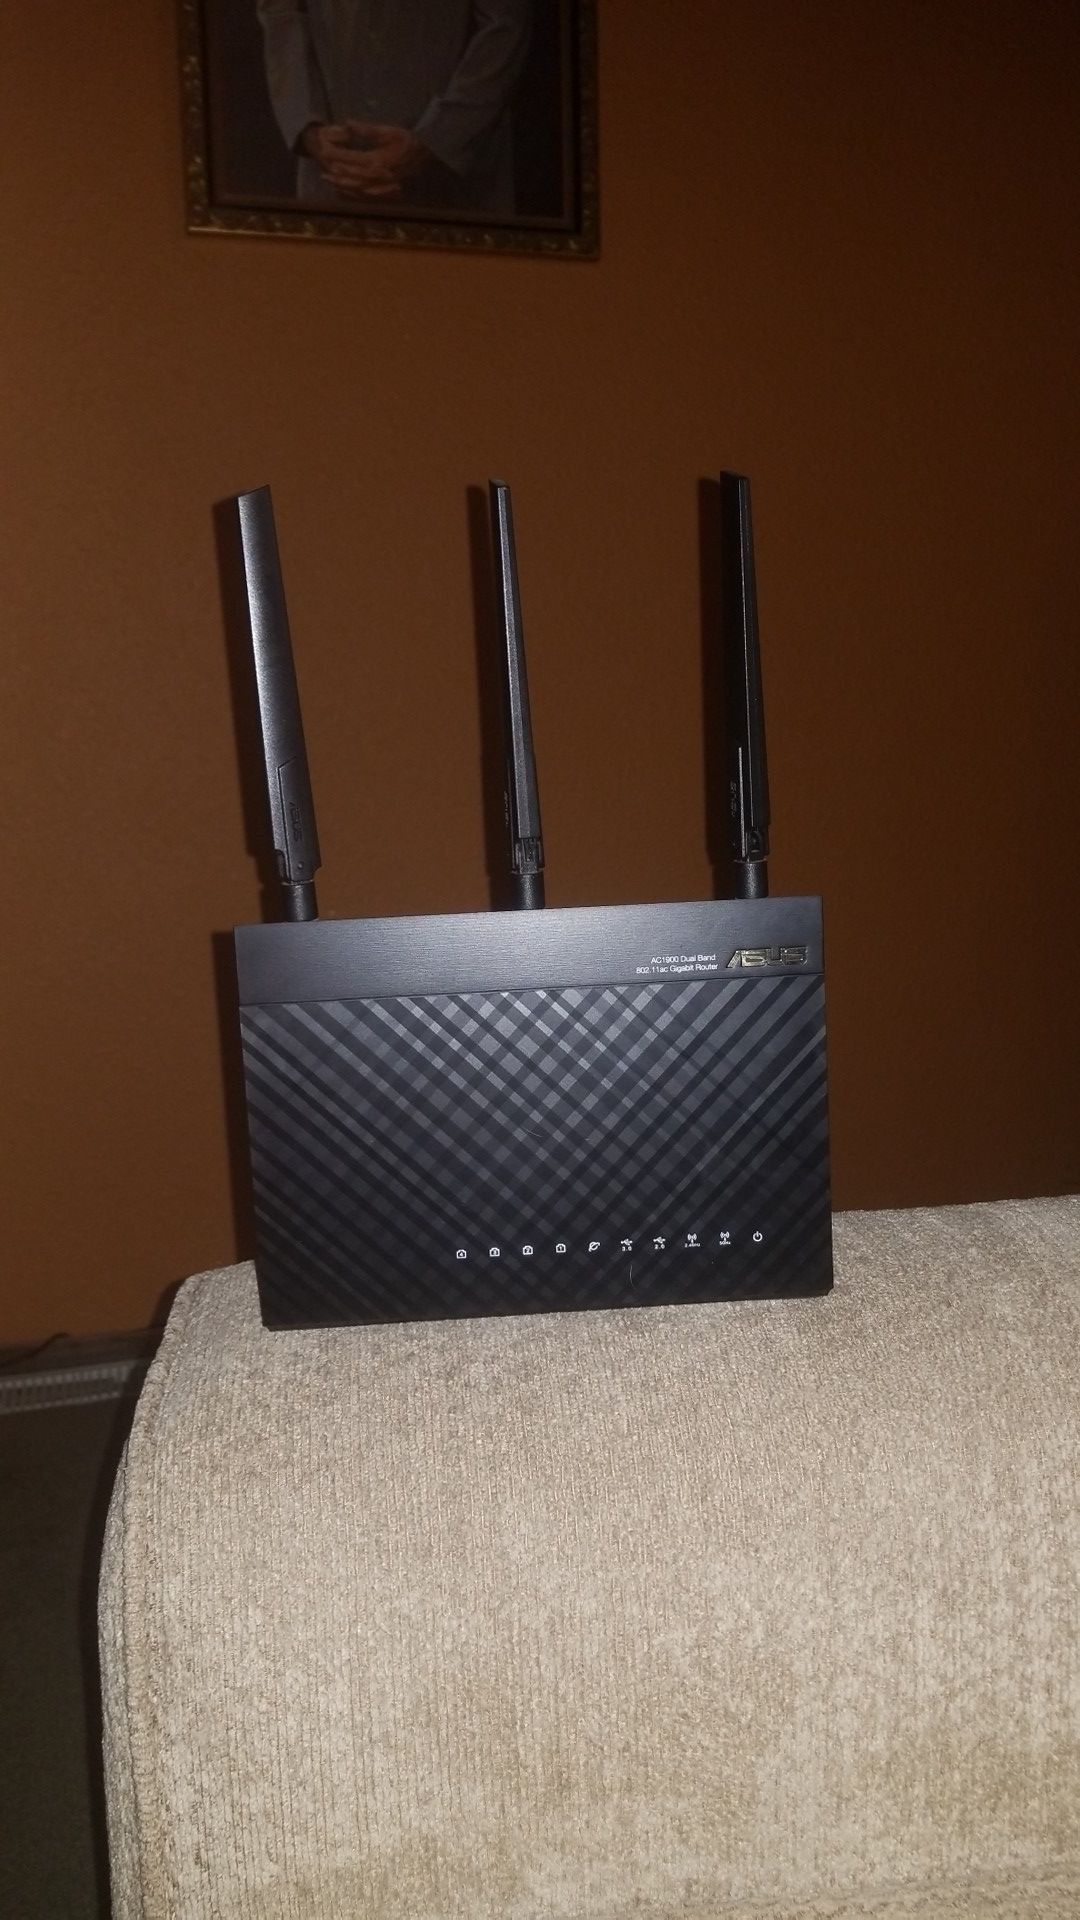 ASUS AC 1900 Dual Band Router